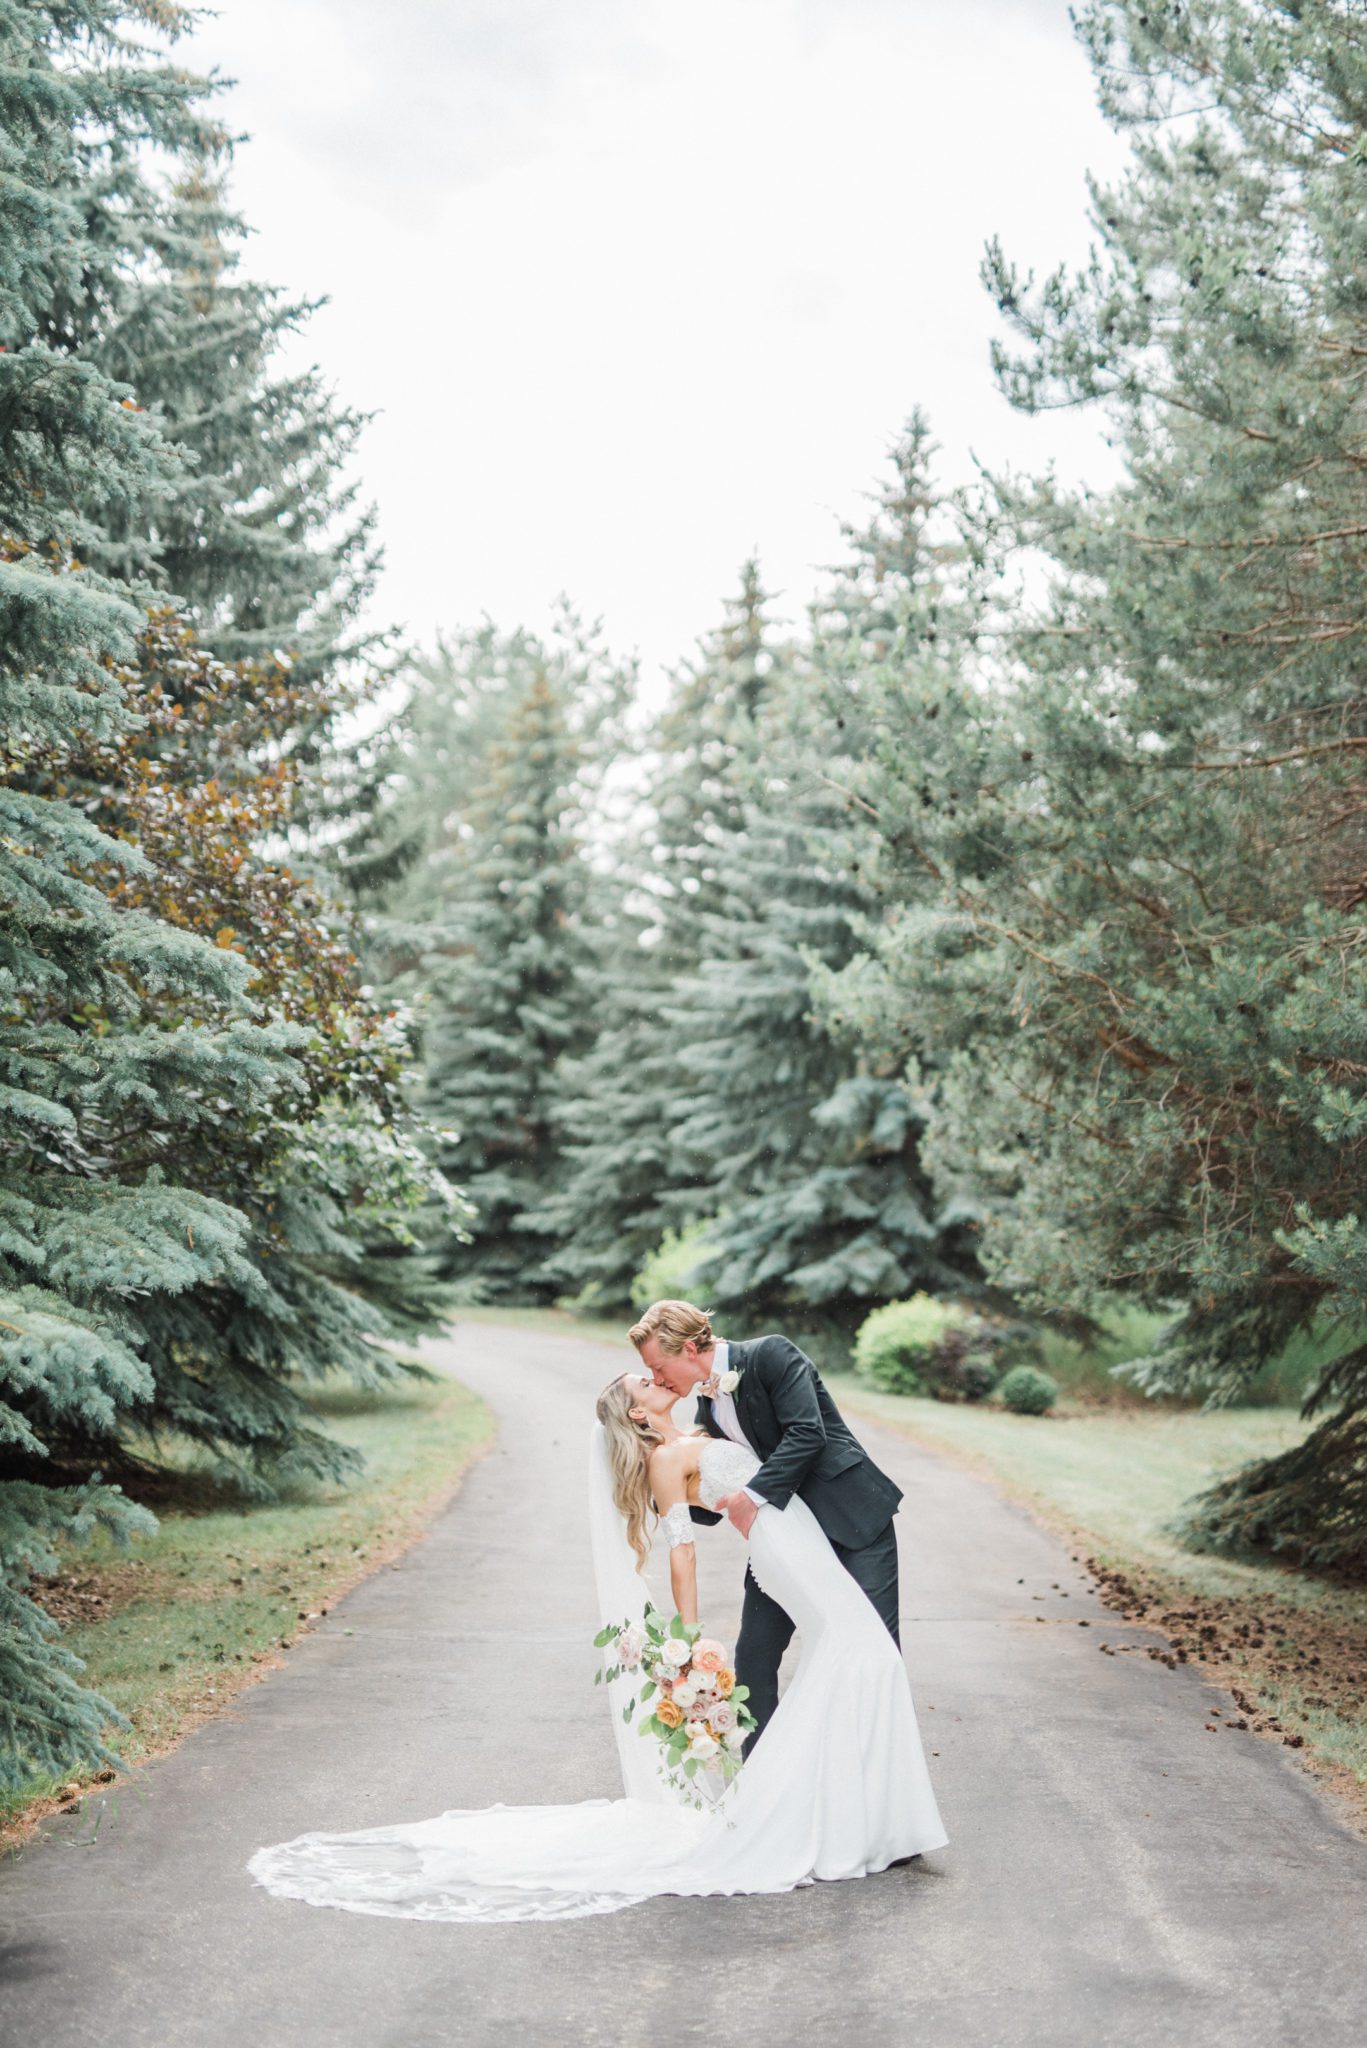 Timeless bride and groom portrait inspiration